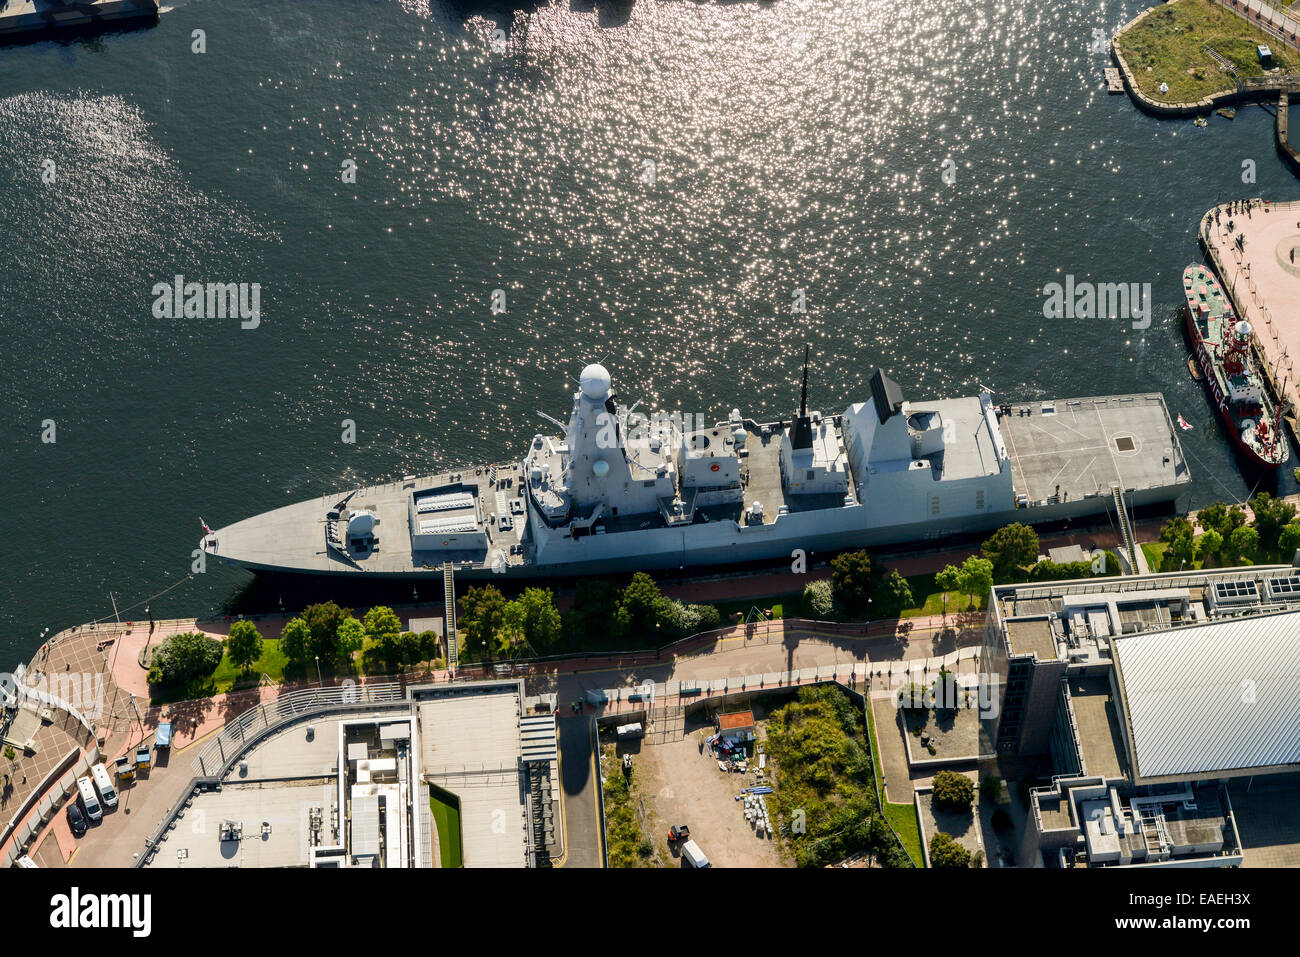 An aerial view of the Type 45 guided missile destroyer HMS Duncan docked in Cardiff during the NATO Summit of 2014 Stock Photo